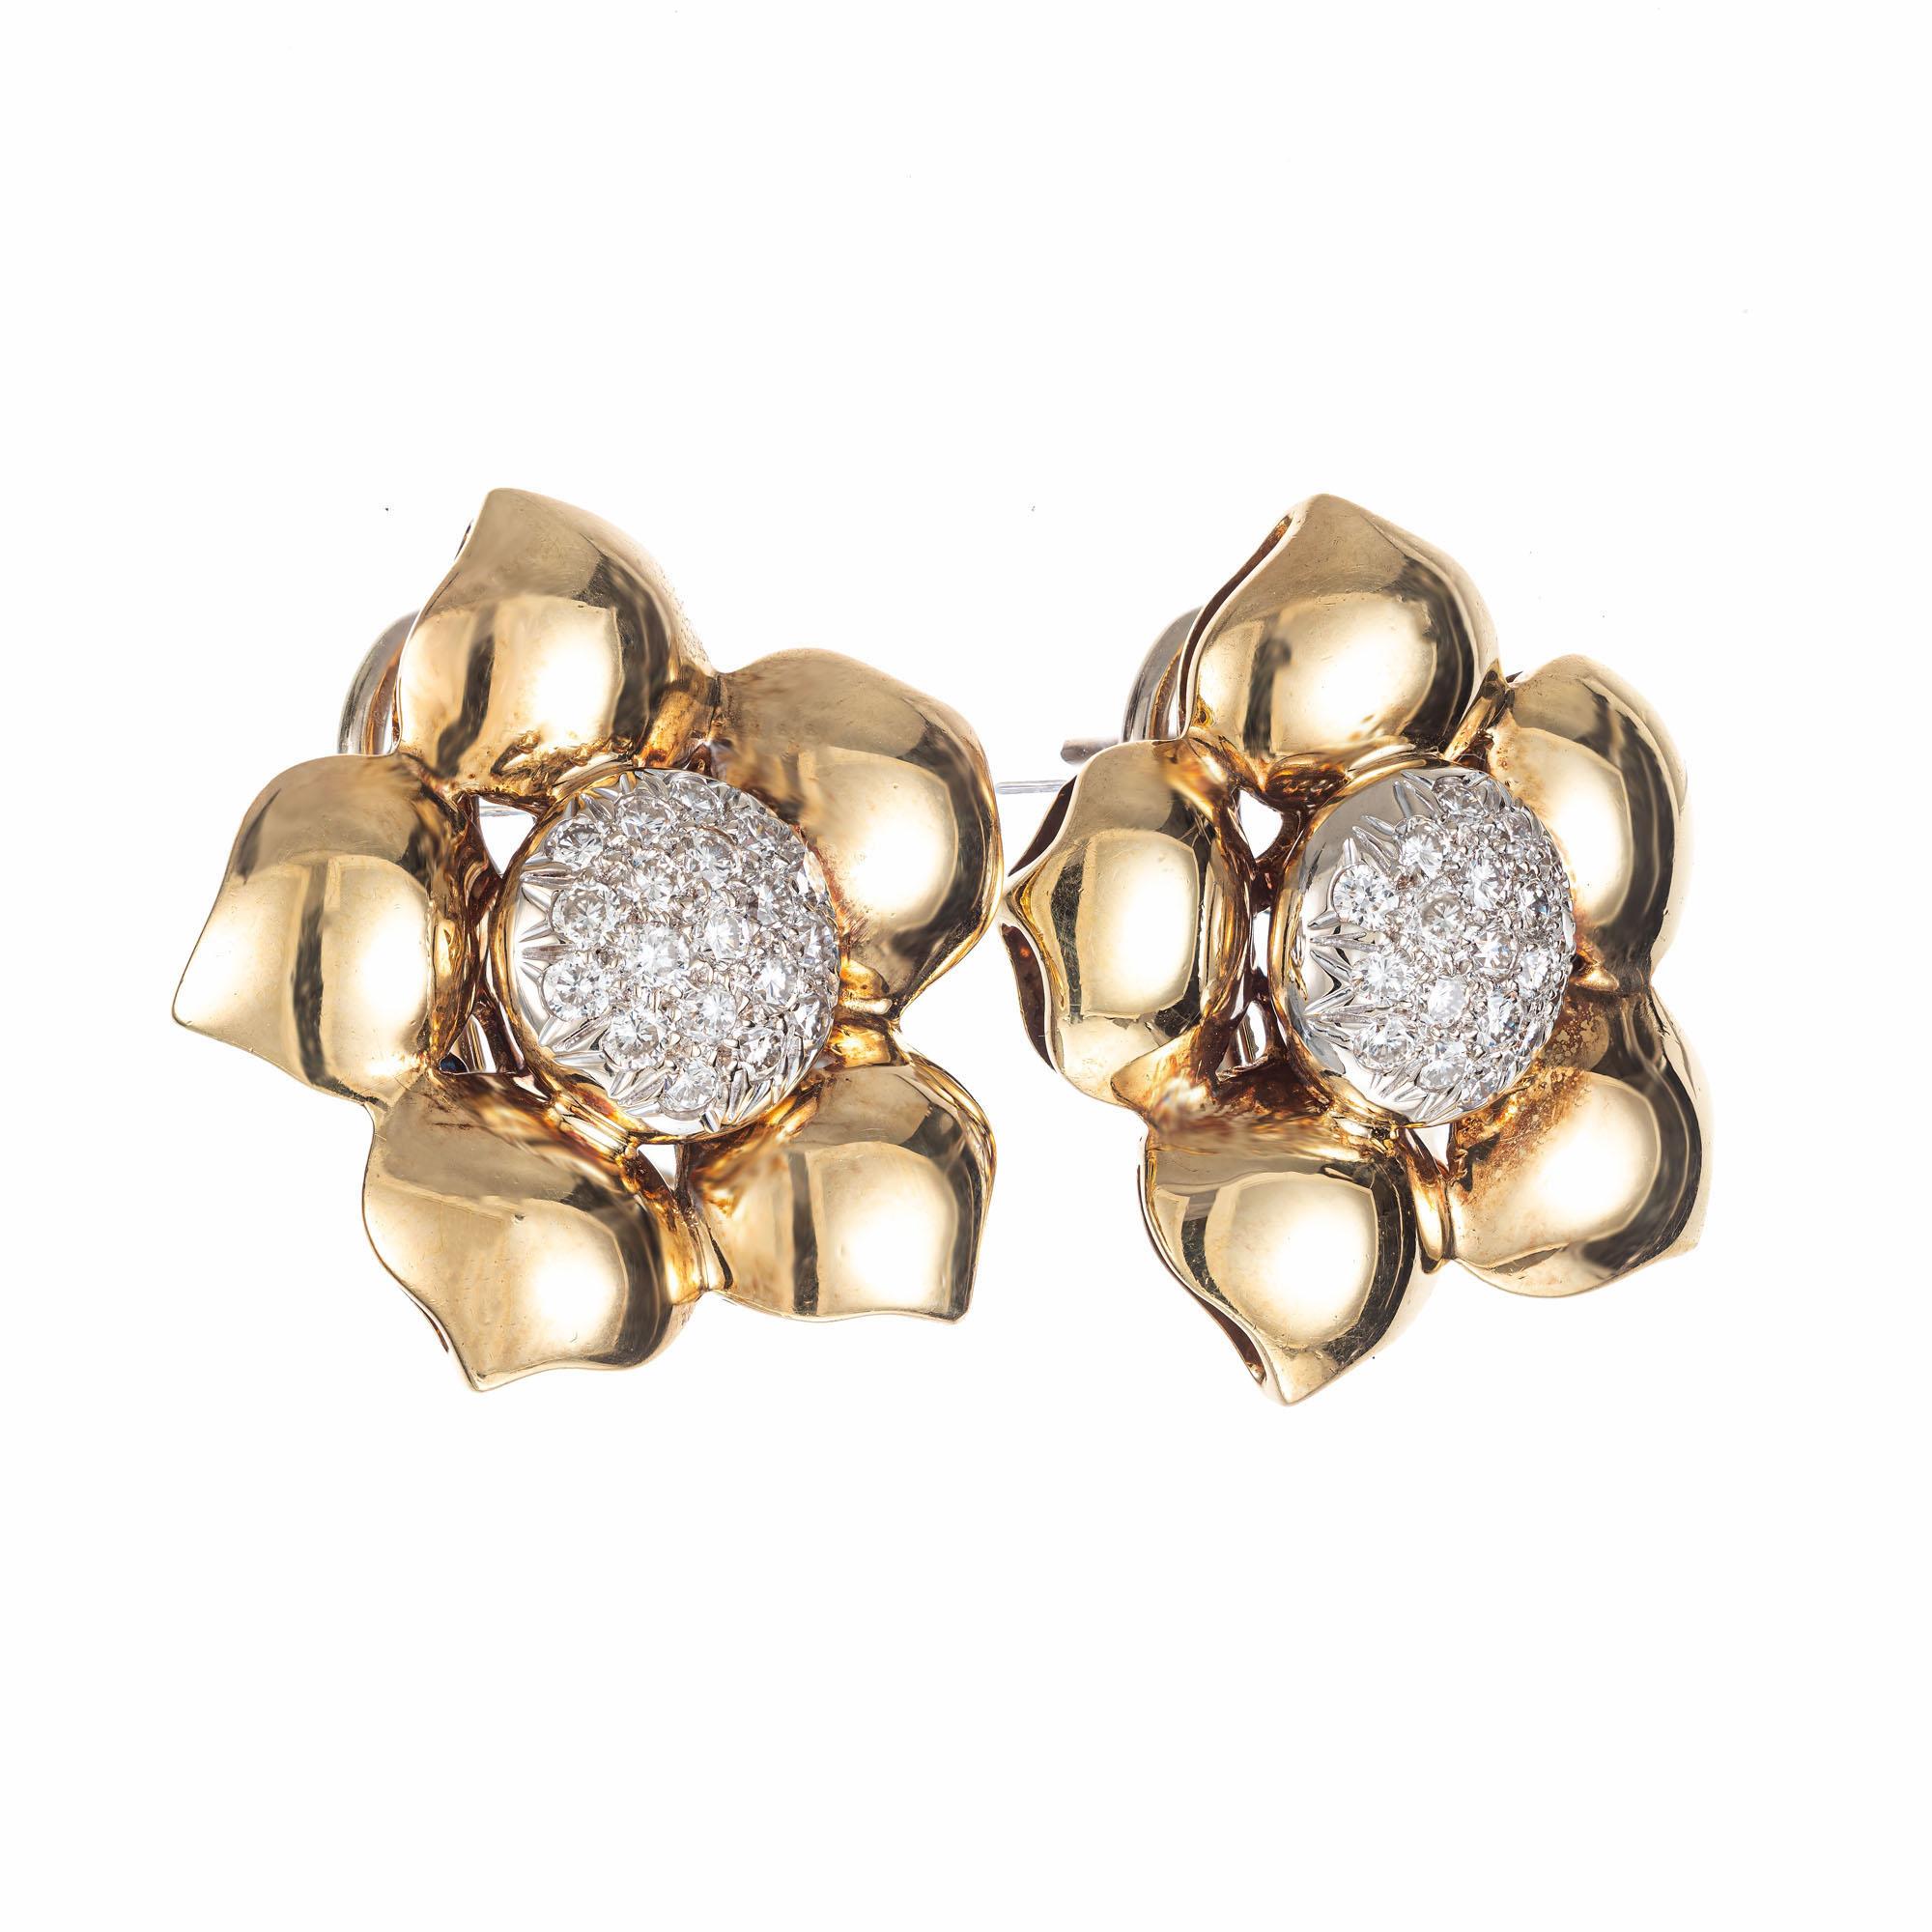 1960's 3-D flower style diamond clip post earrings. 38 round pave set diamond domed, 18 white gold clusters with 18k yellow gold flower petal halos. Secure posts and omega backs. The earrings are flat on the back and sit perfectly on the lobe. They